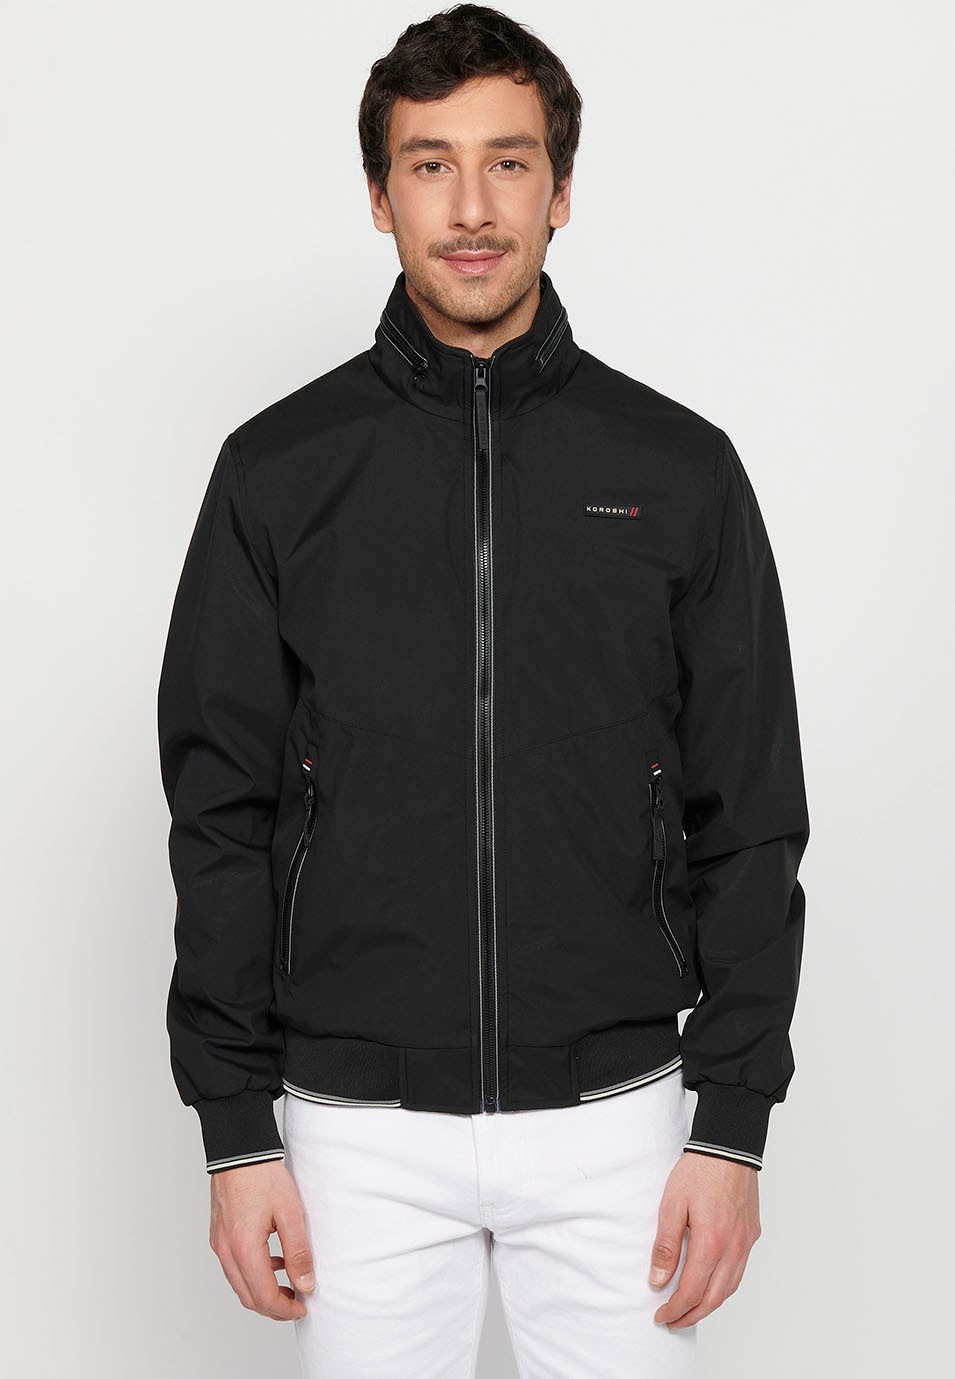 Long-sleeved high-neck windbreaker jacket with front zipper closure and ribbed finishes with pockets, one inside in Black for Men 1